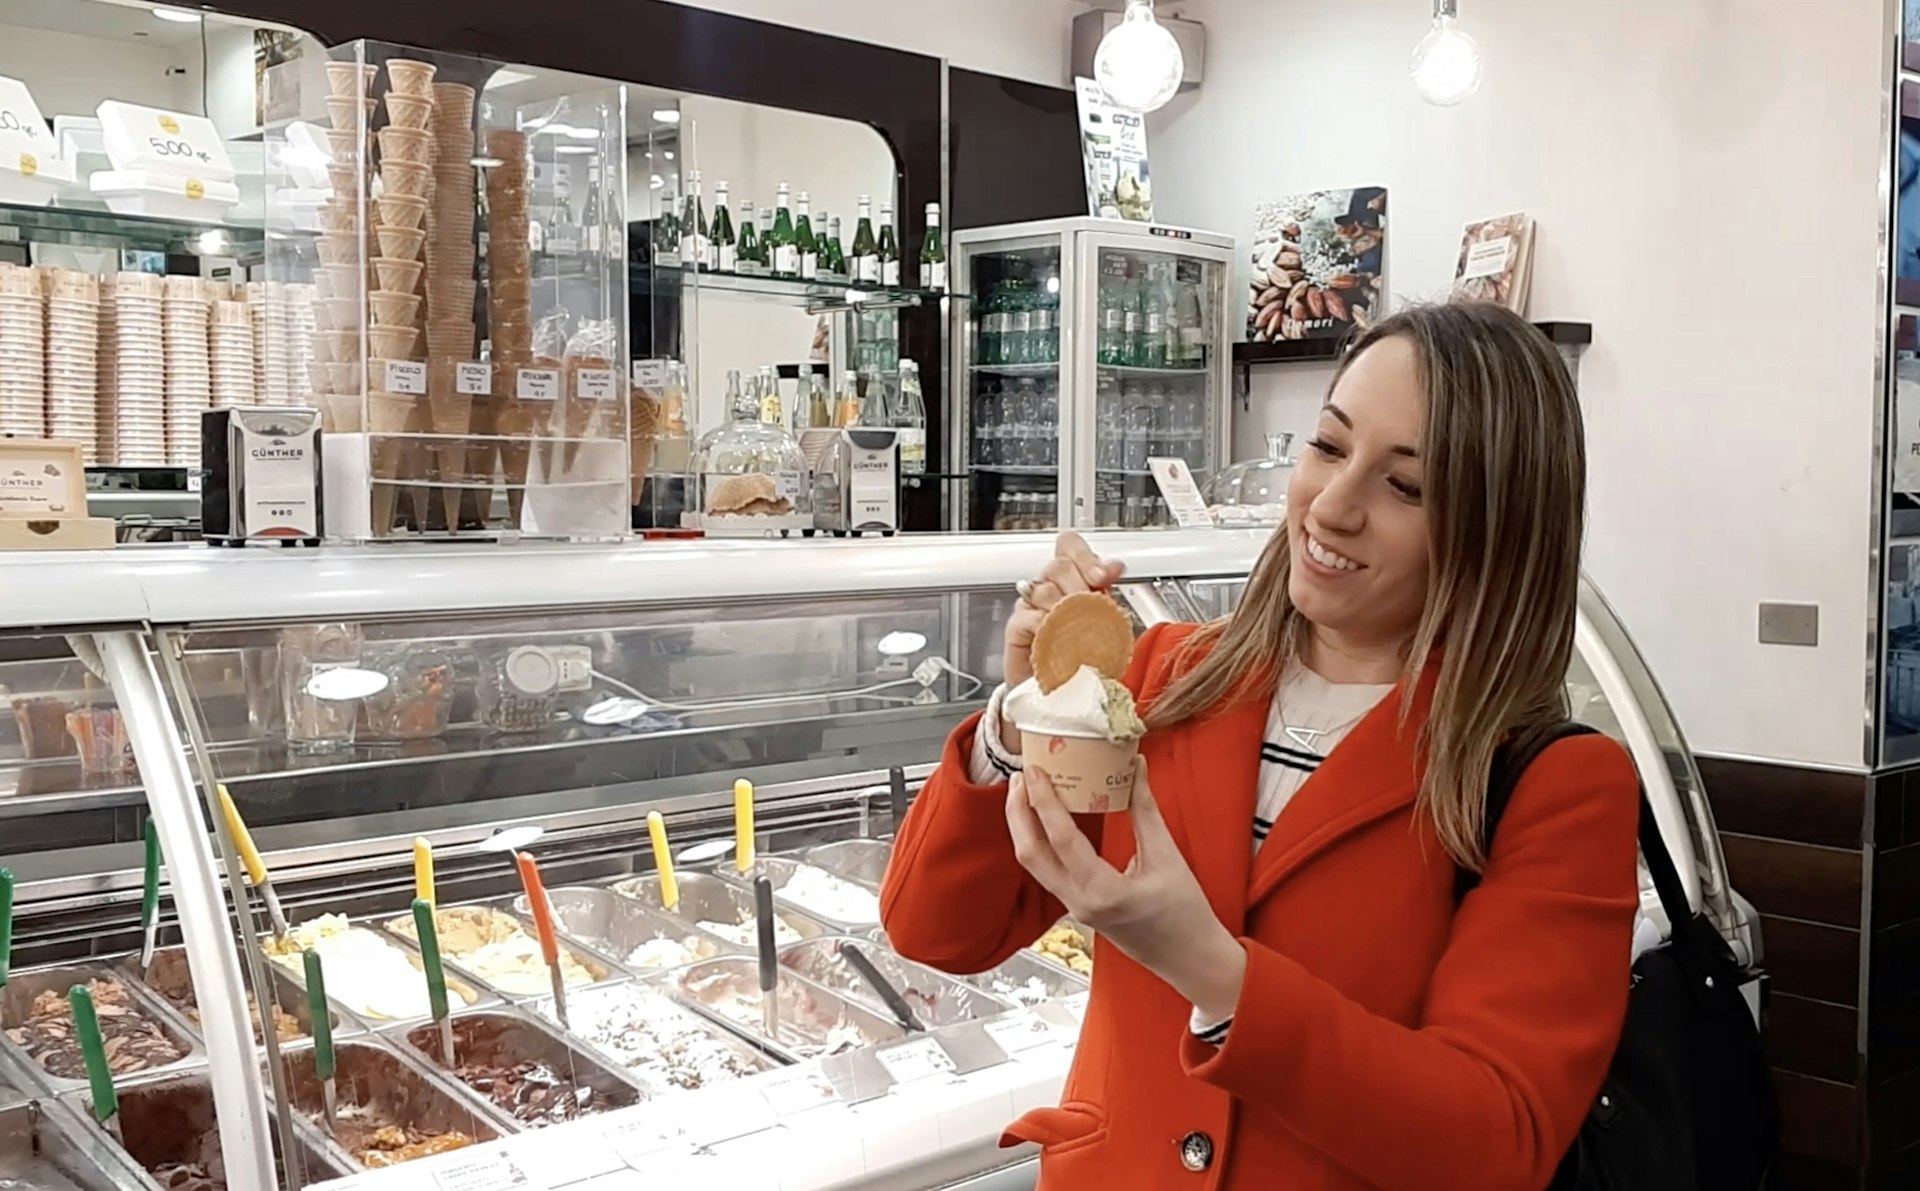 Wearing a red jacket and smiling, Alexandra holds a cup of gelato in the shop